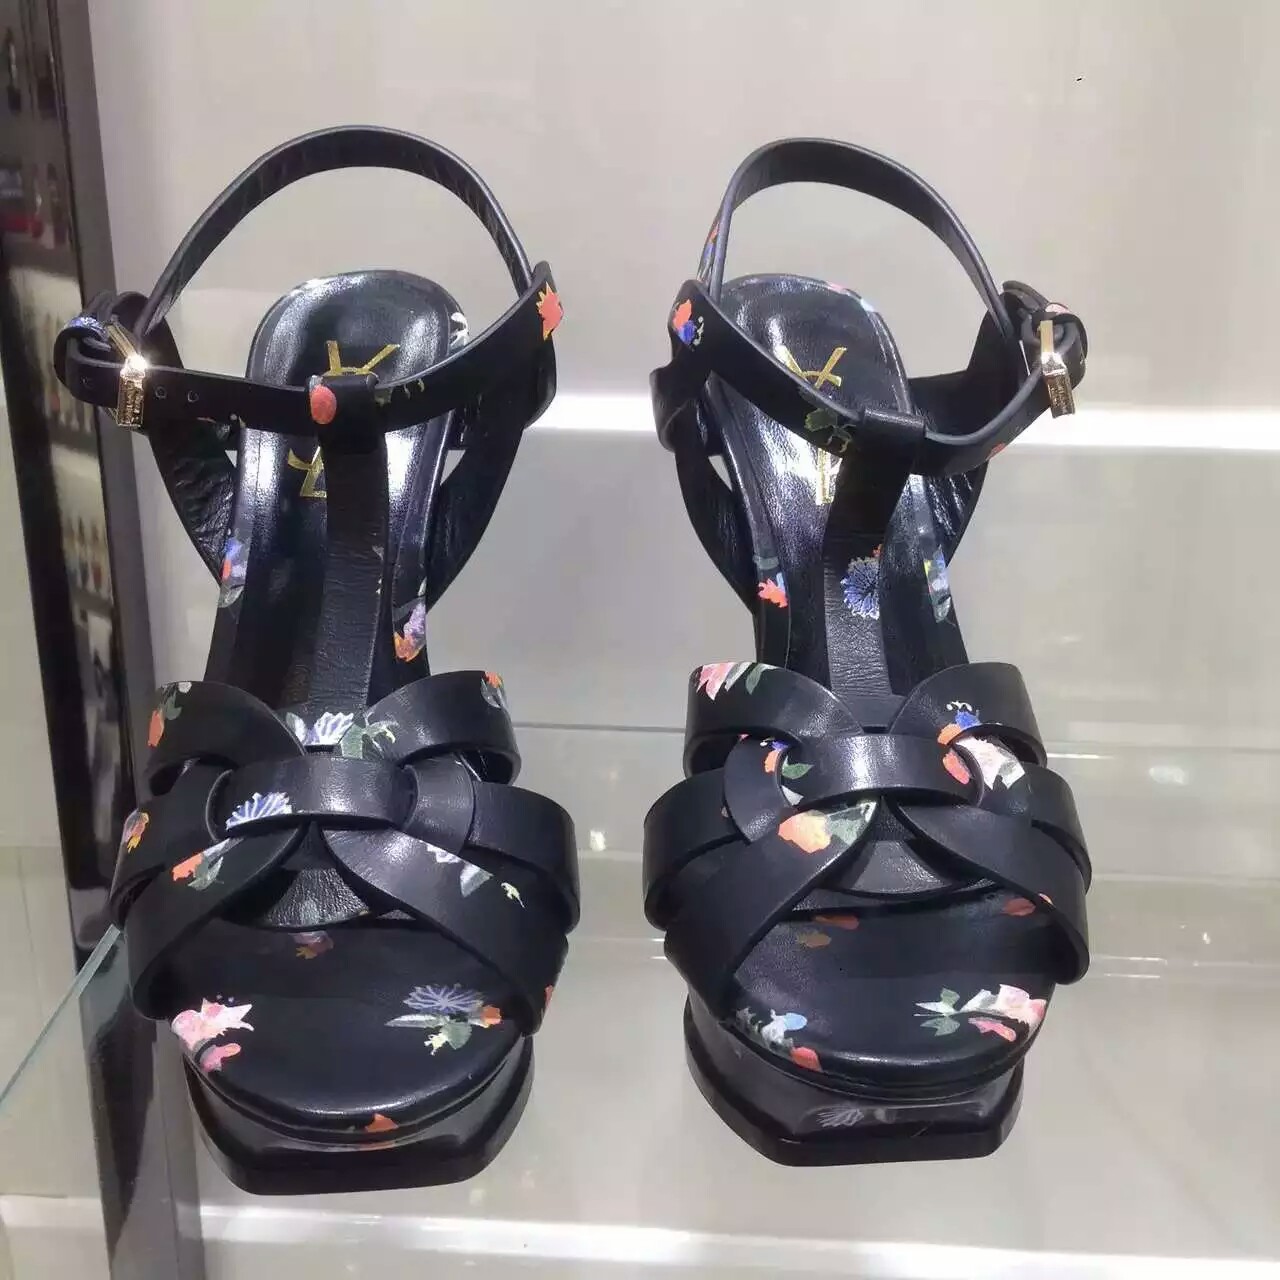 2016 Saint Laurent Shoes Cheap Sale-Saint Laurent Jodie 105 Strappy Sandal in Black and Multicolor Prairie Flower Printed Leather - Click Image to Close